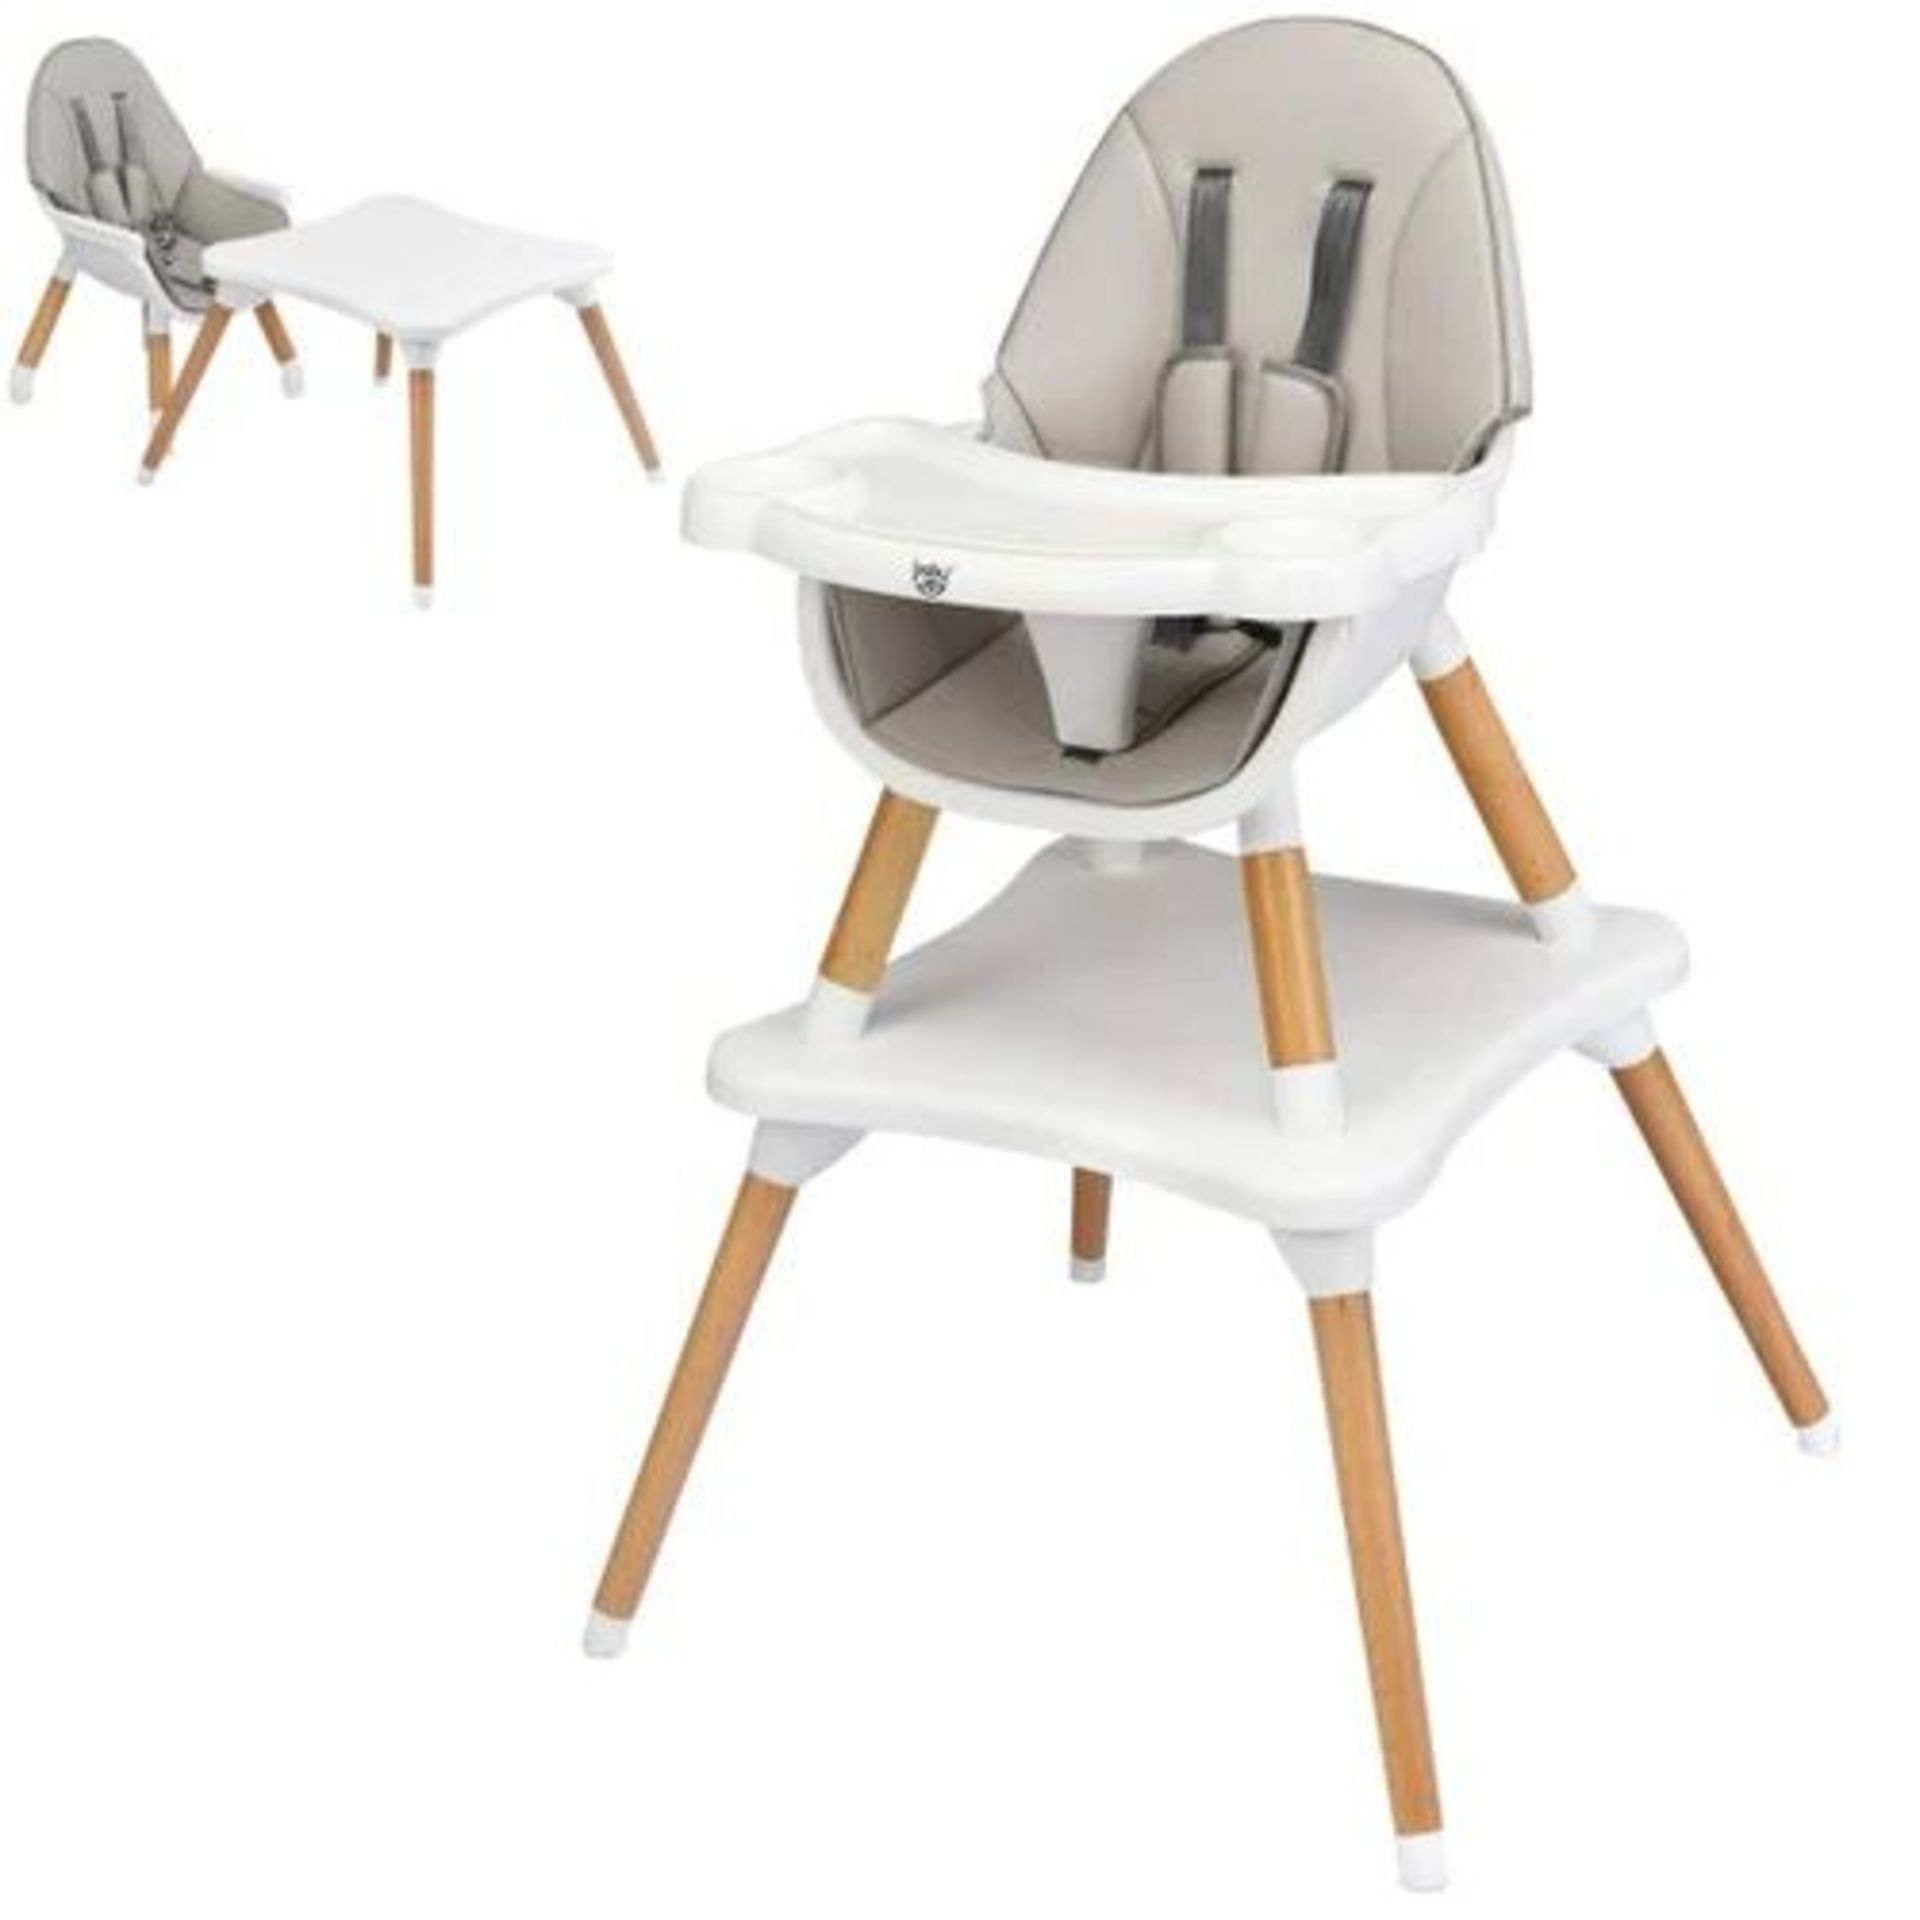 4-in-1 Baby Wooden Convertible High Chair. - ER53. This is a 4-in-1 baby highchair designed with the